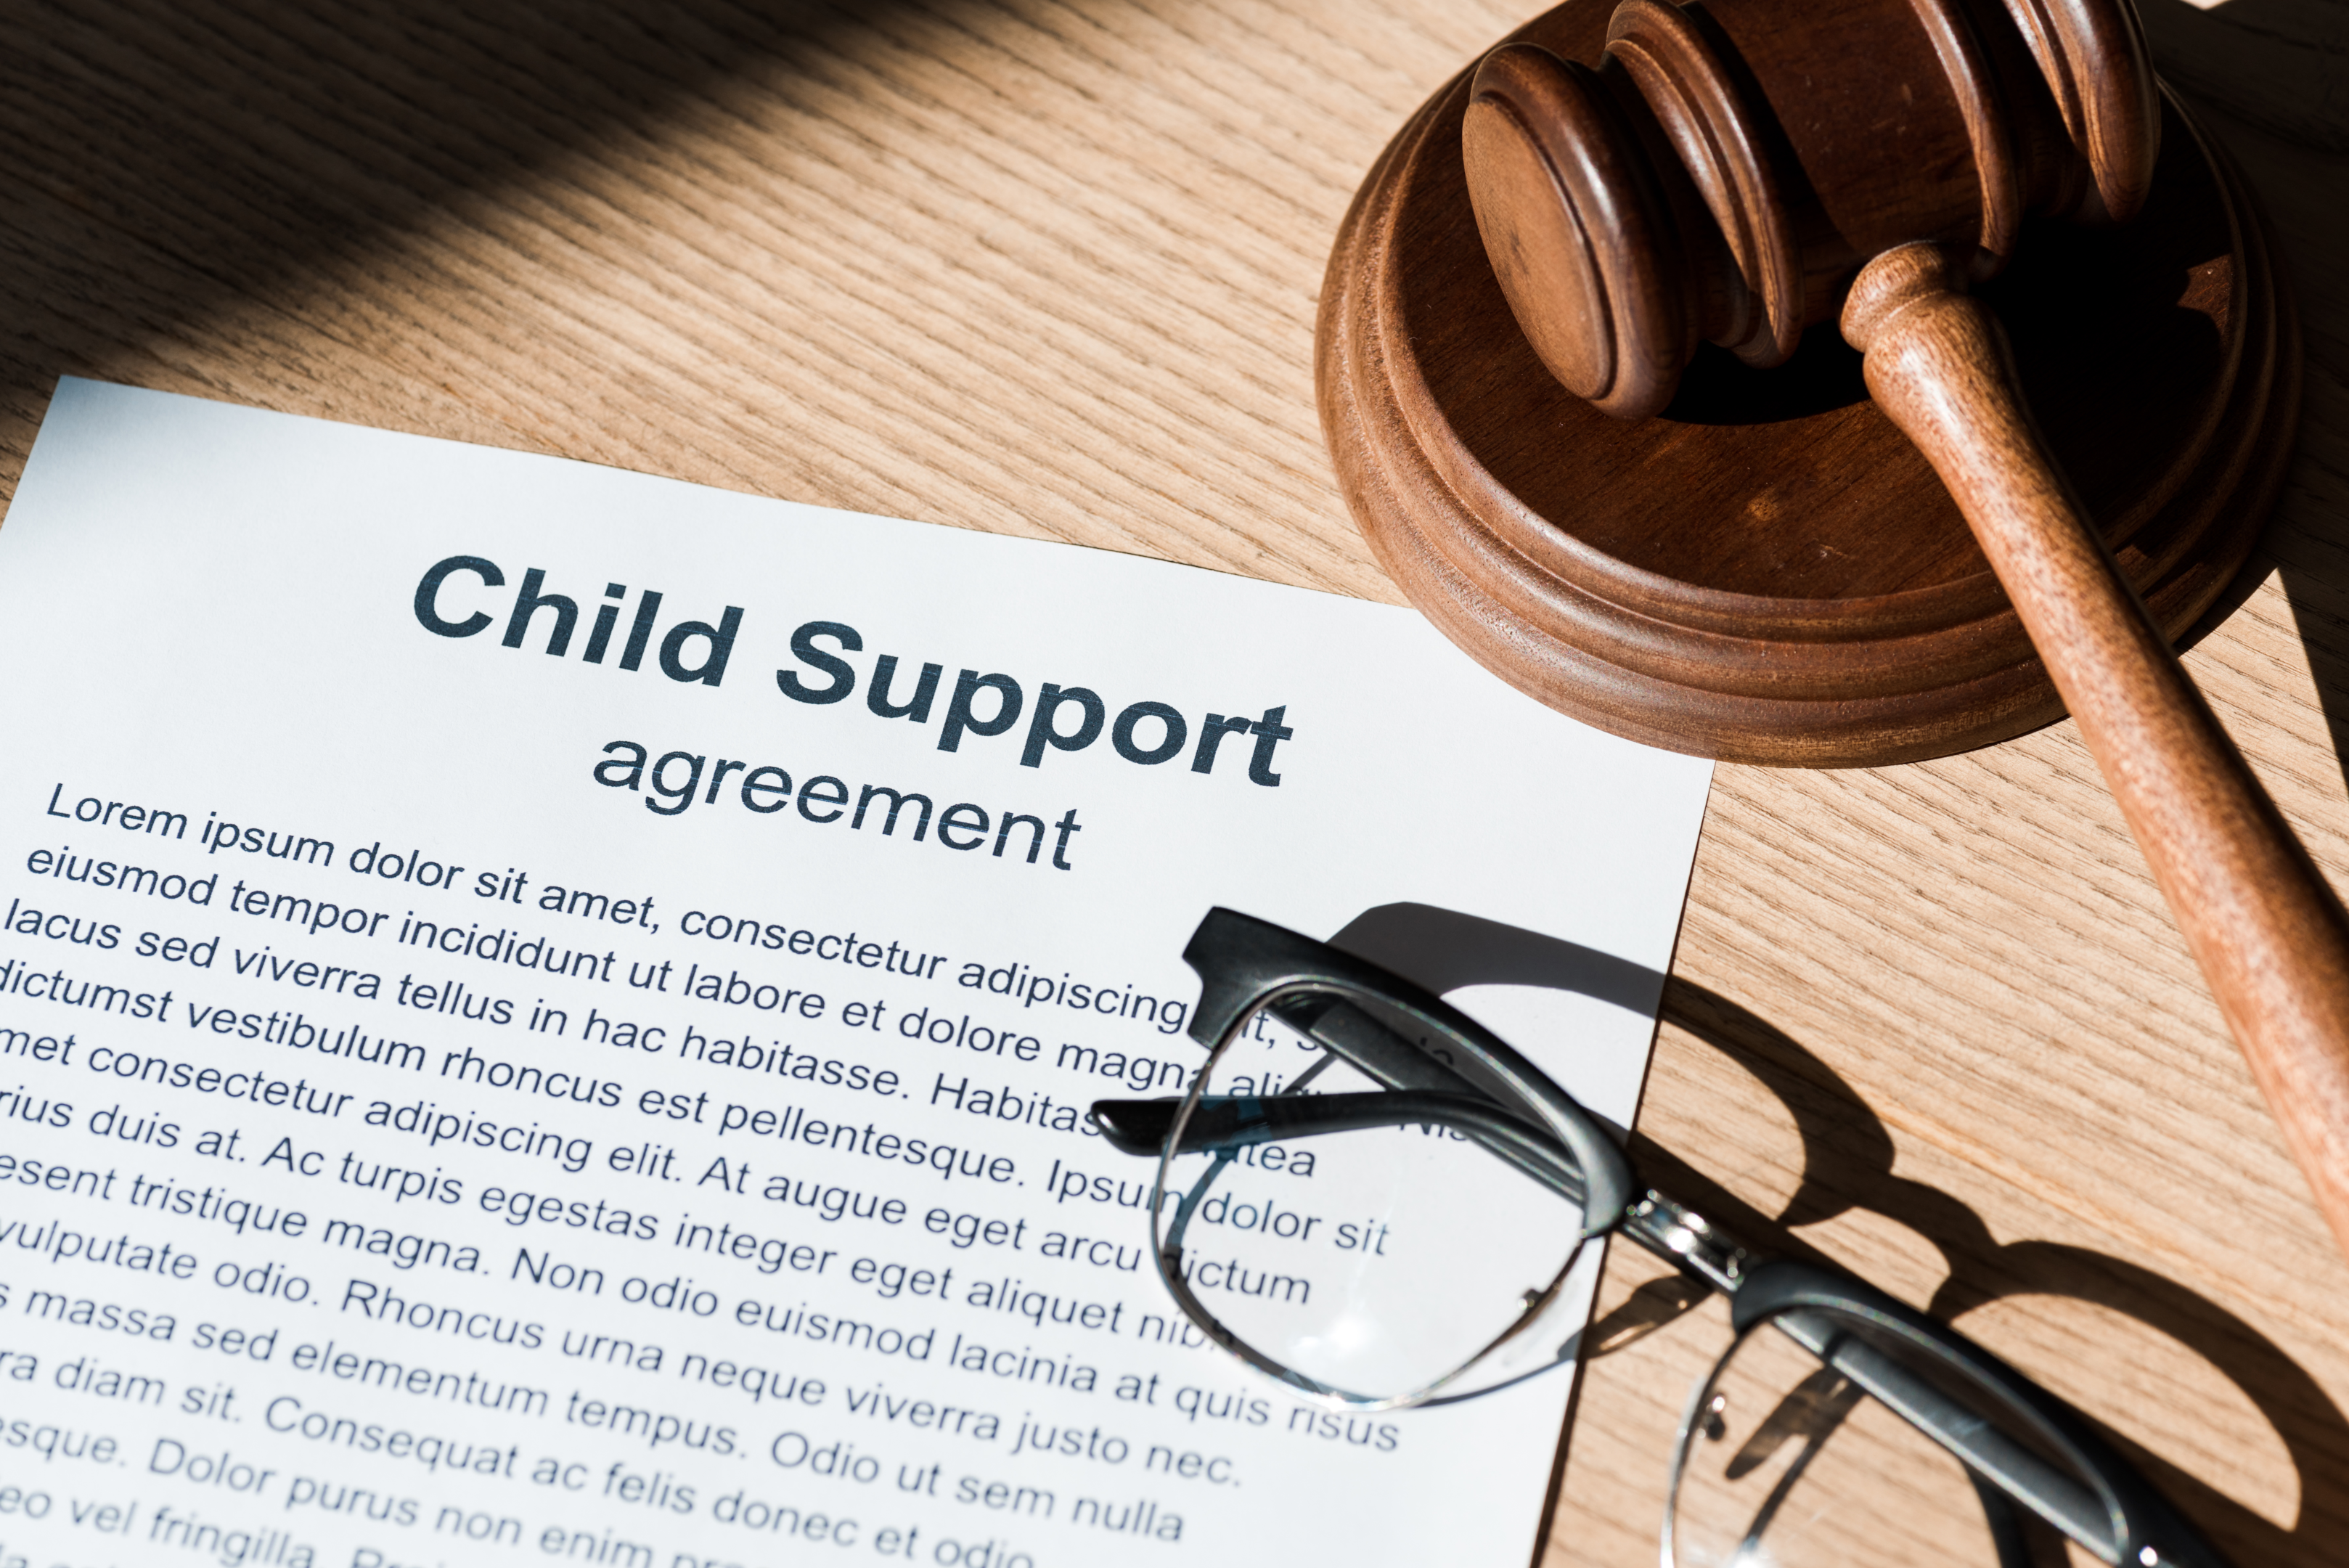 A wooden gavel beside a child support document illustrates the vital role legal agreements play in securing a child's future for unmarried couples.